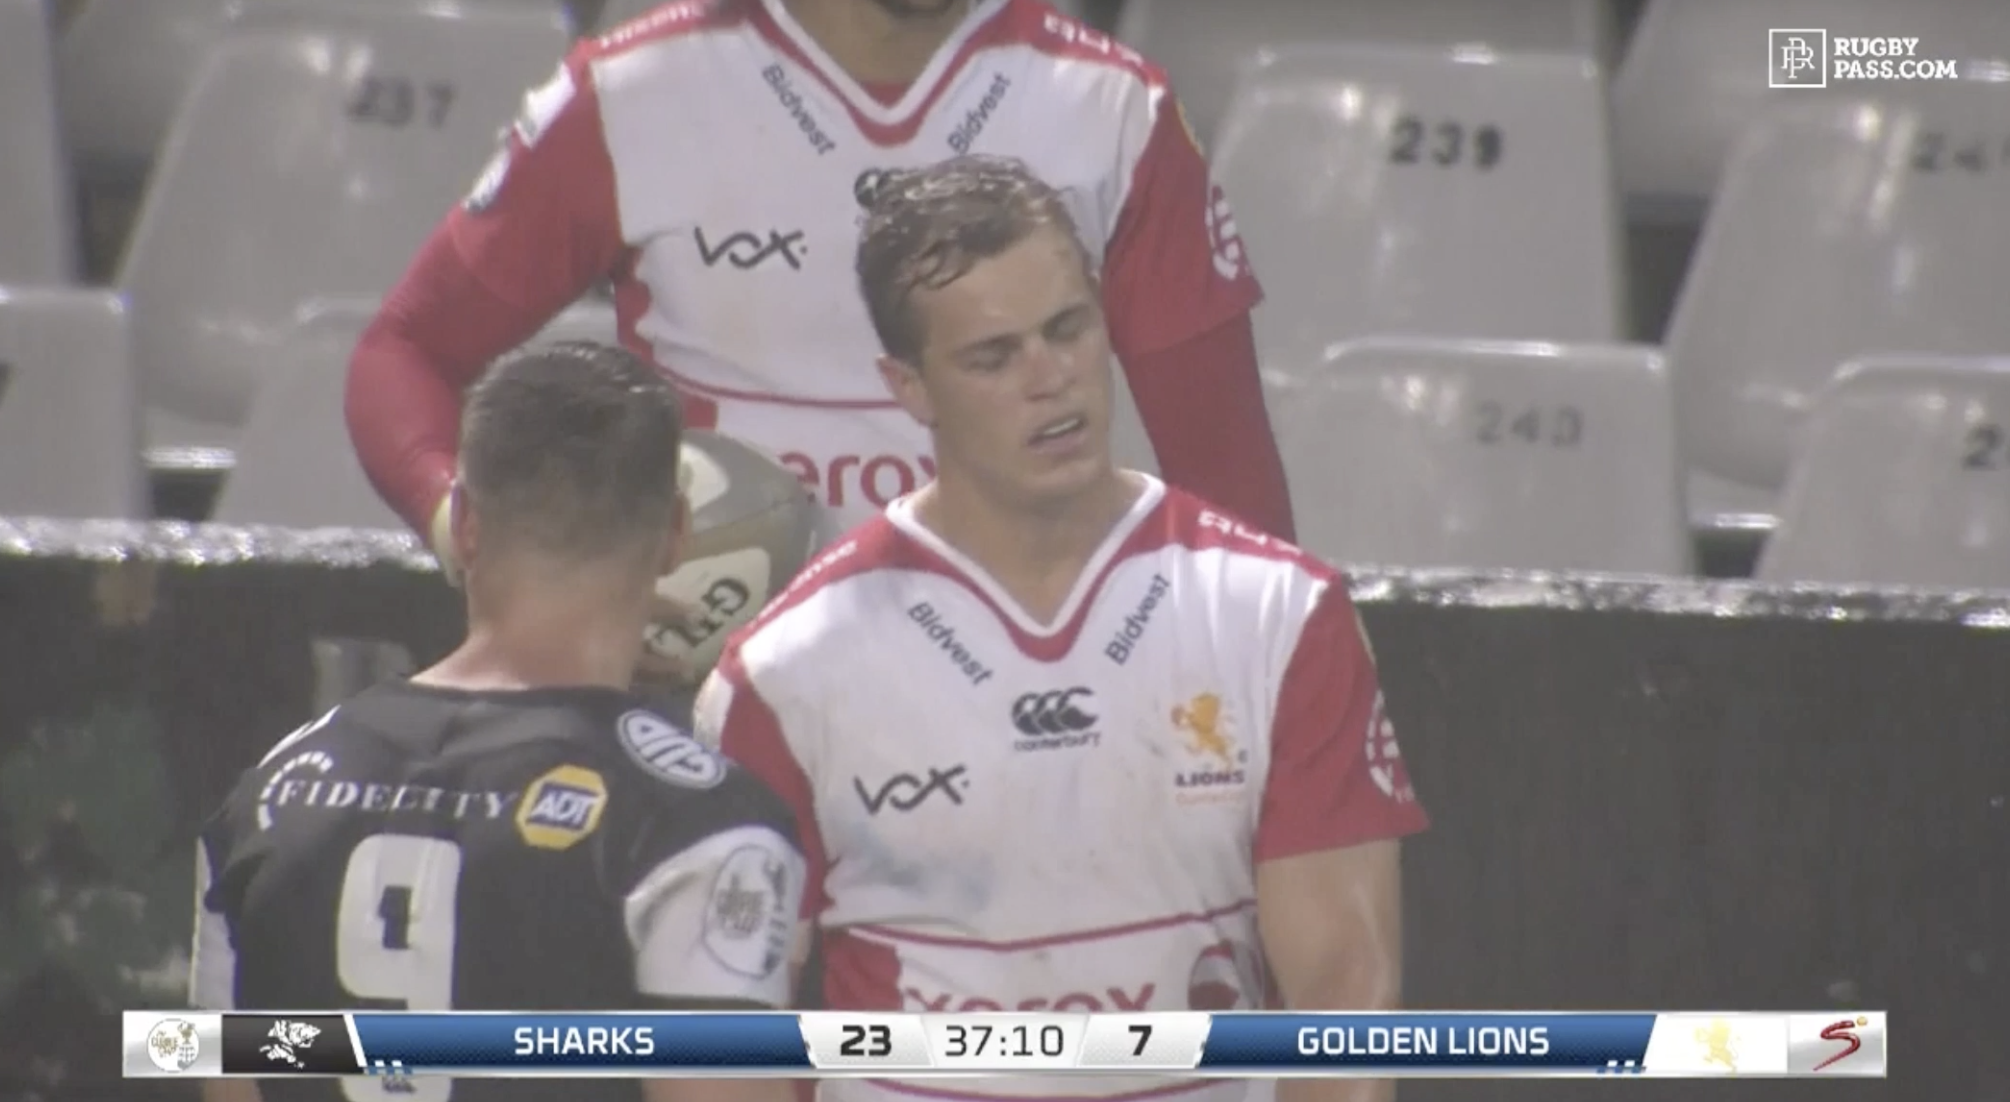 WATCH: Comedy of errors as Golden Lions player slices the ball back past his own dead ball line